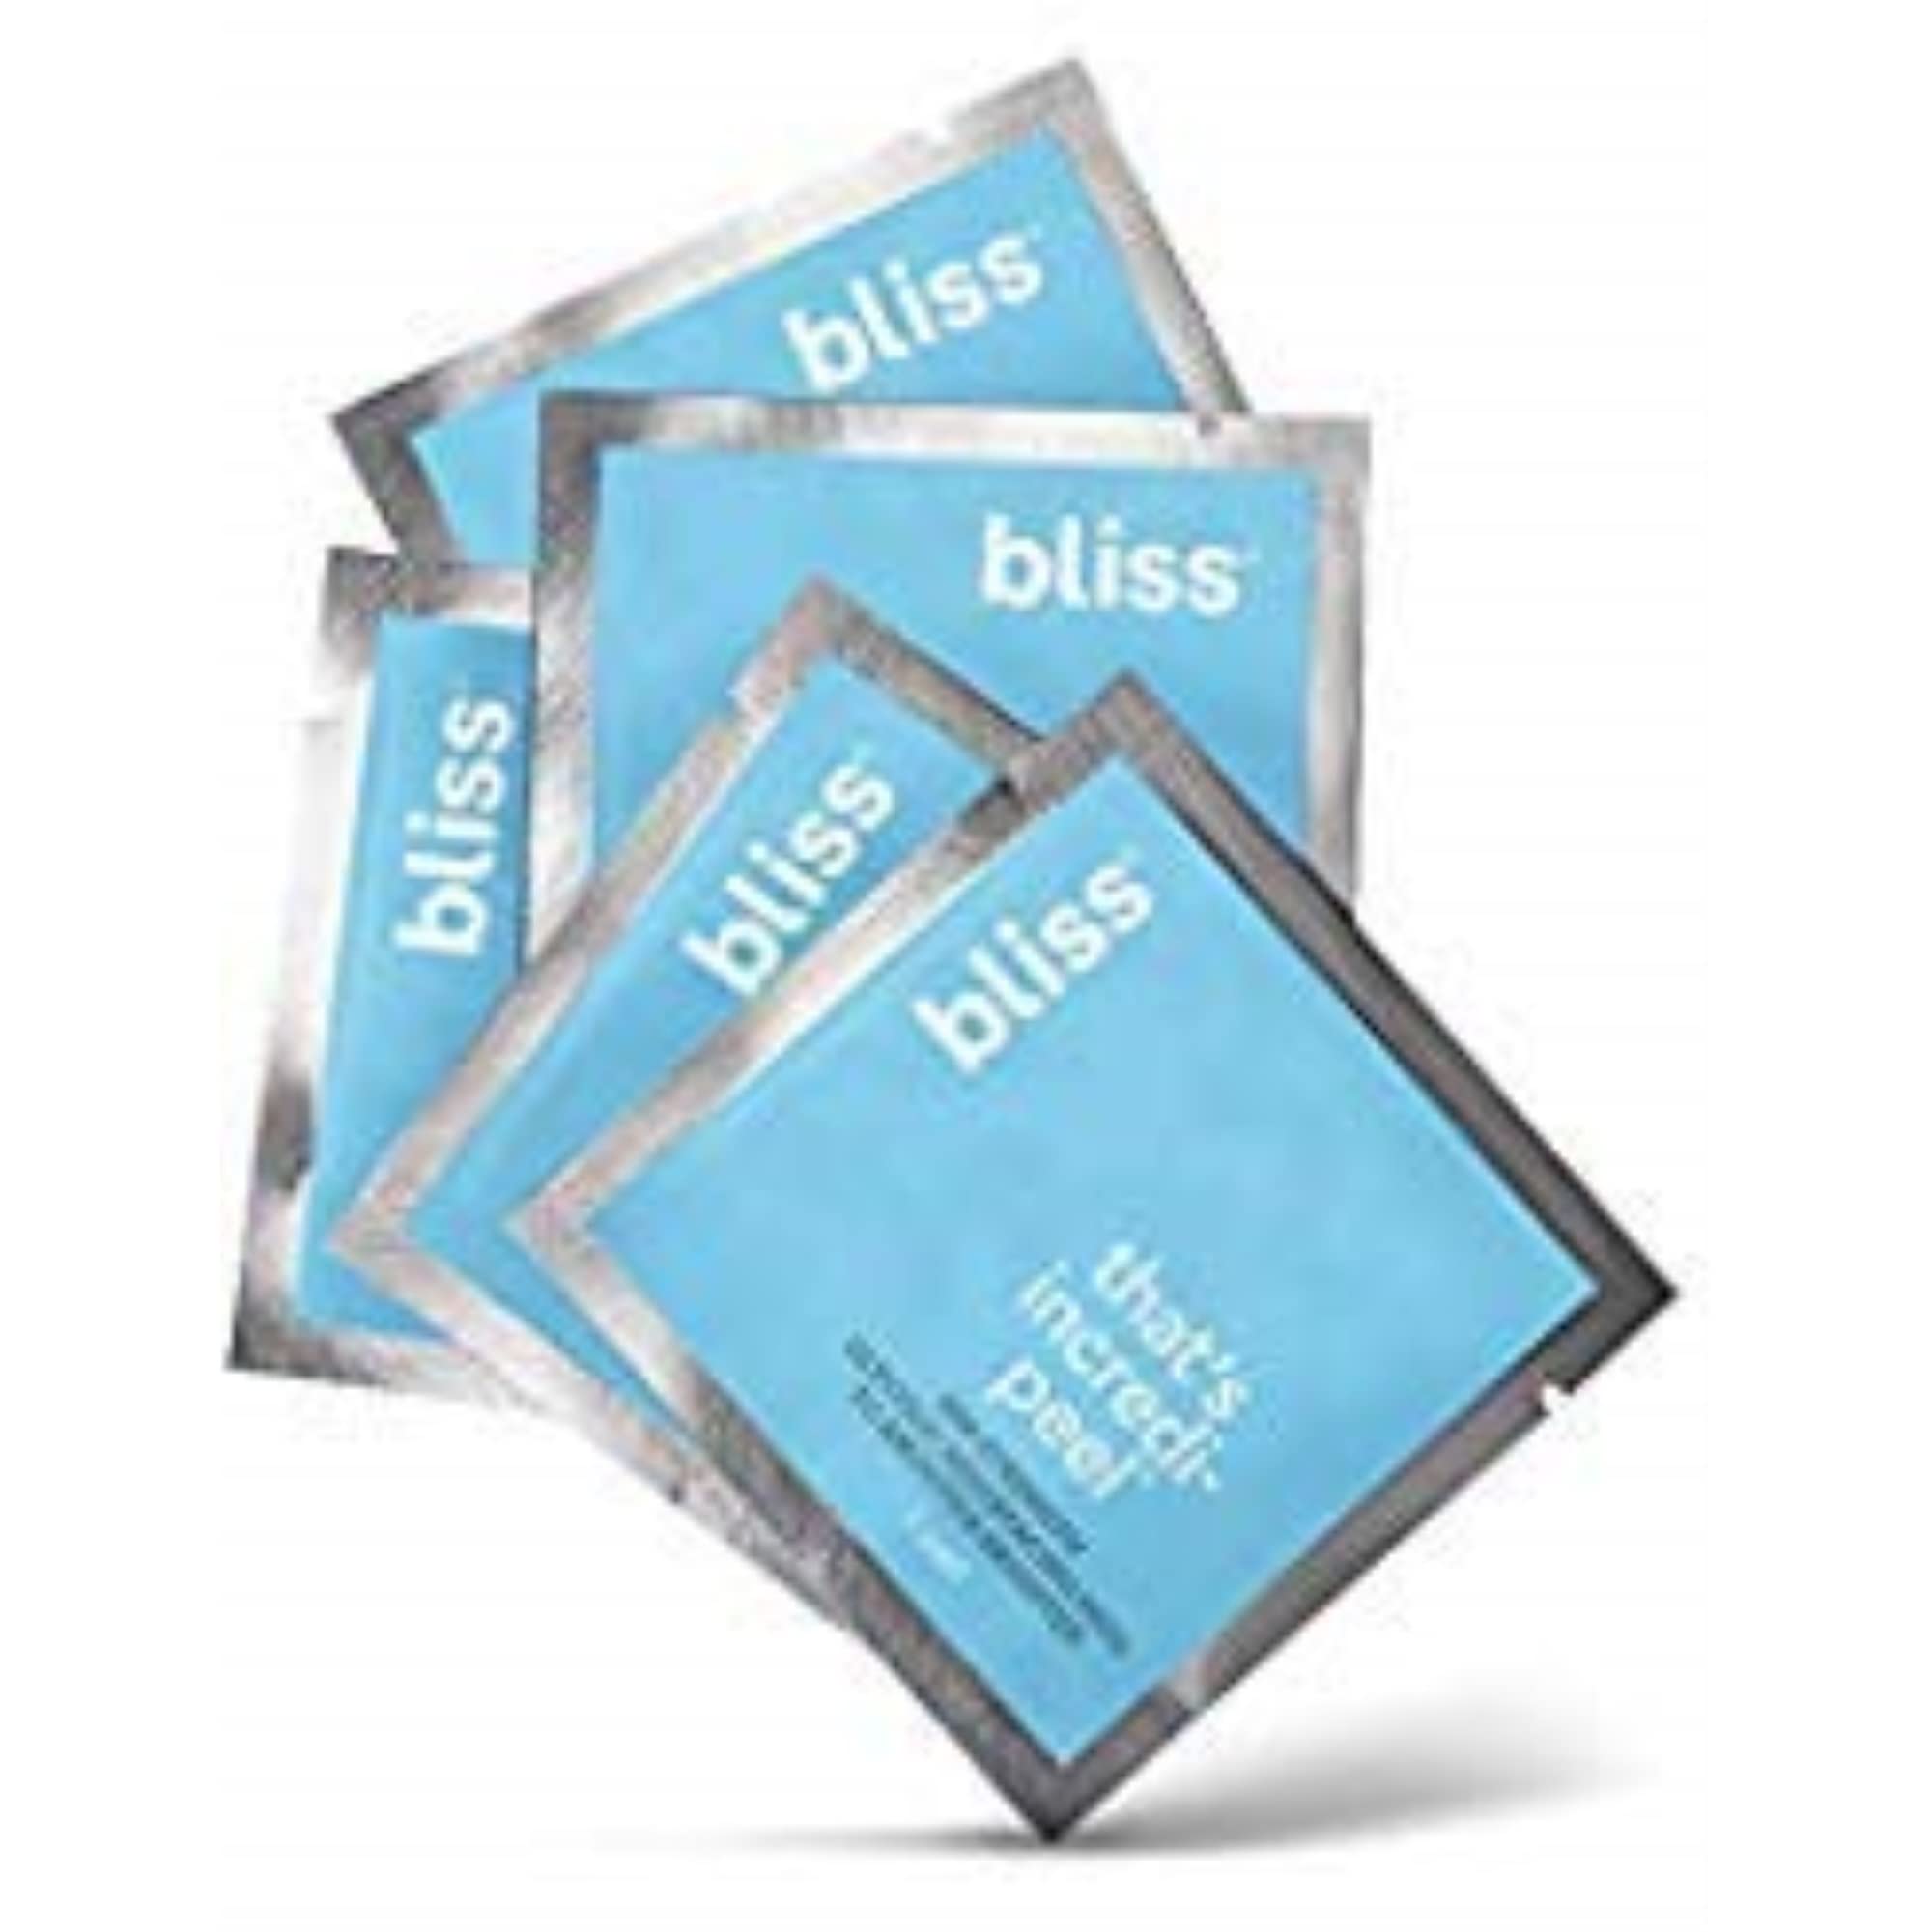 Book Cover Bliss 10% Glycolic Acid Peel Pads for Face | Exfoliates & Brightens | Clean | Paraben Free | Cruelty-Free | Vegan | 5 ct.